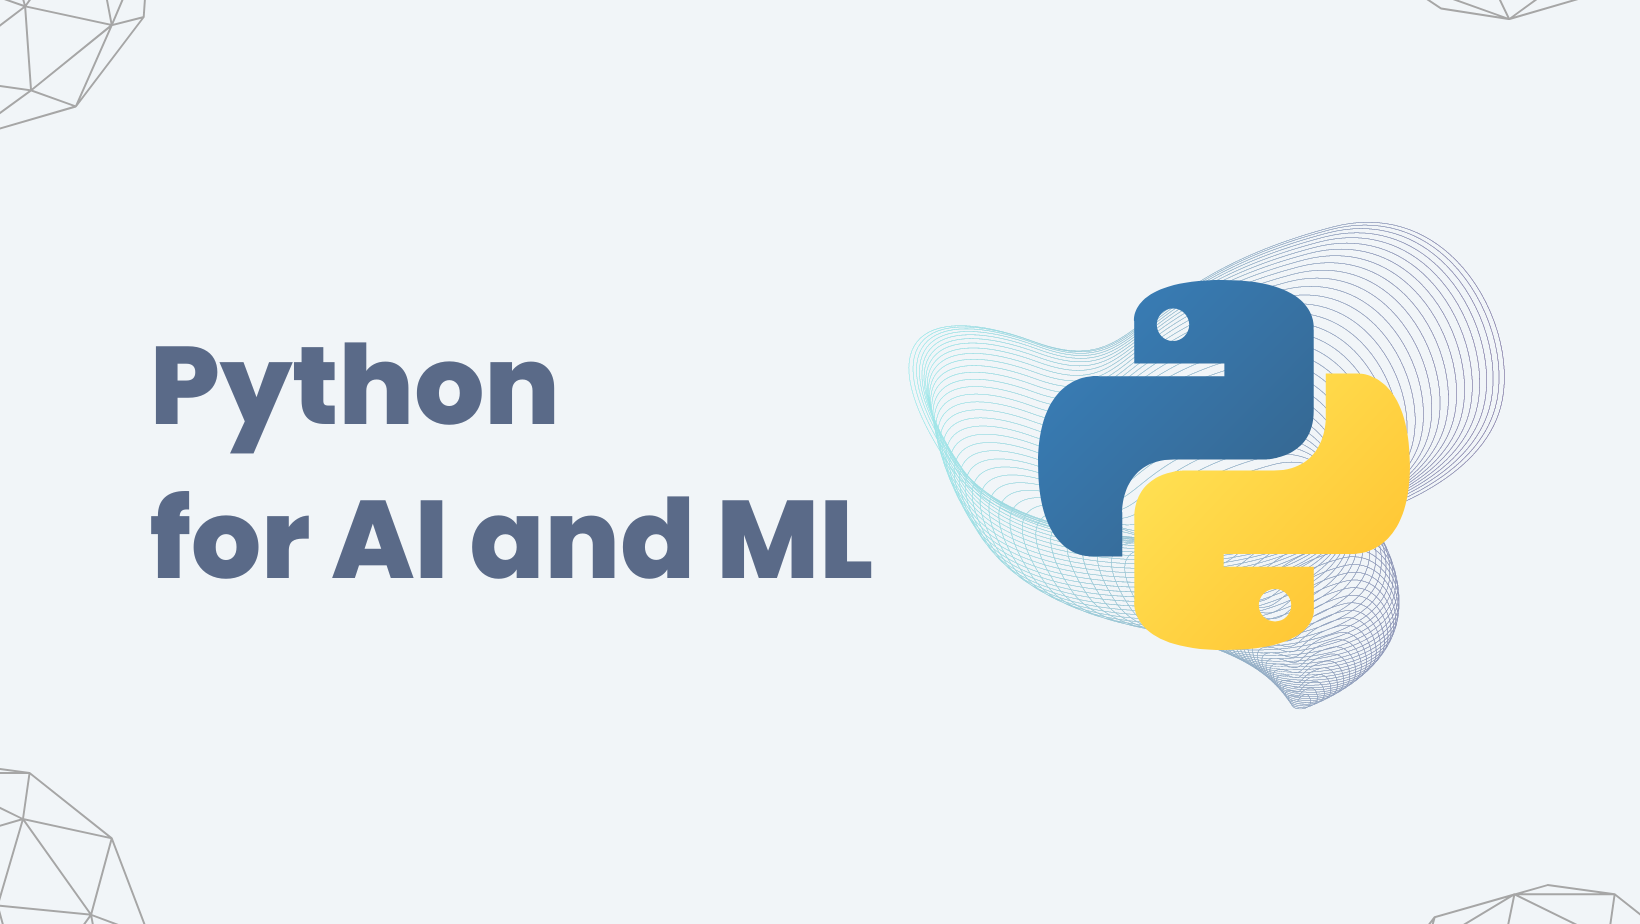 Python for AI and ML intro